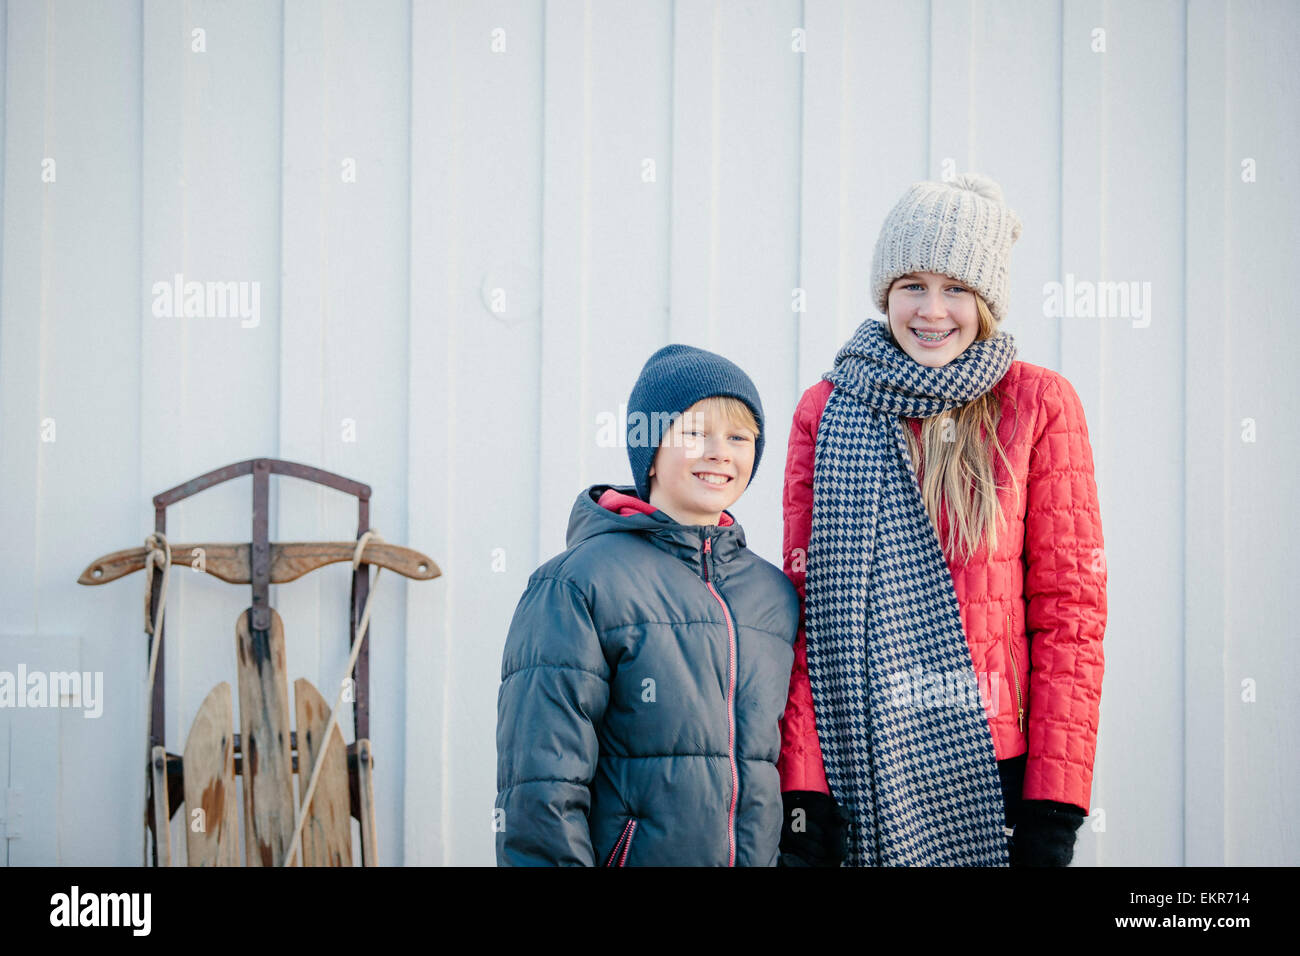 A brother and sister side by side in a yard in winter. Stock Photo